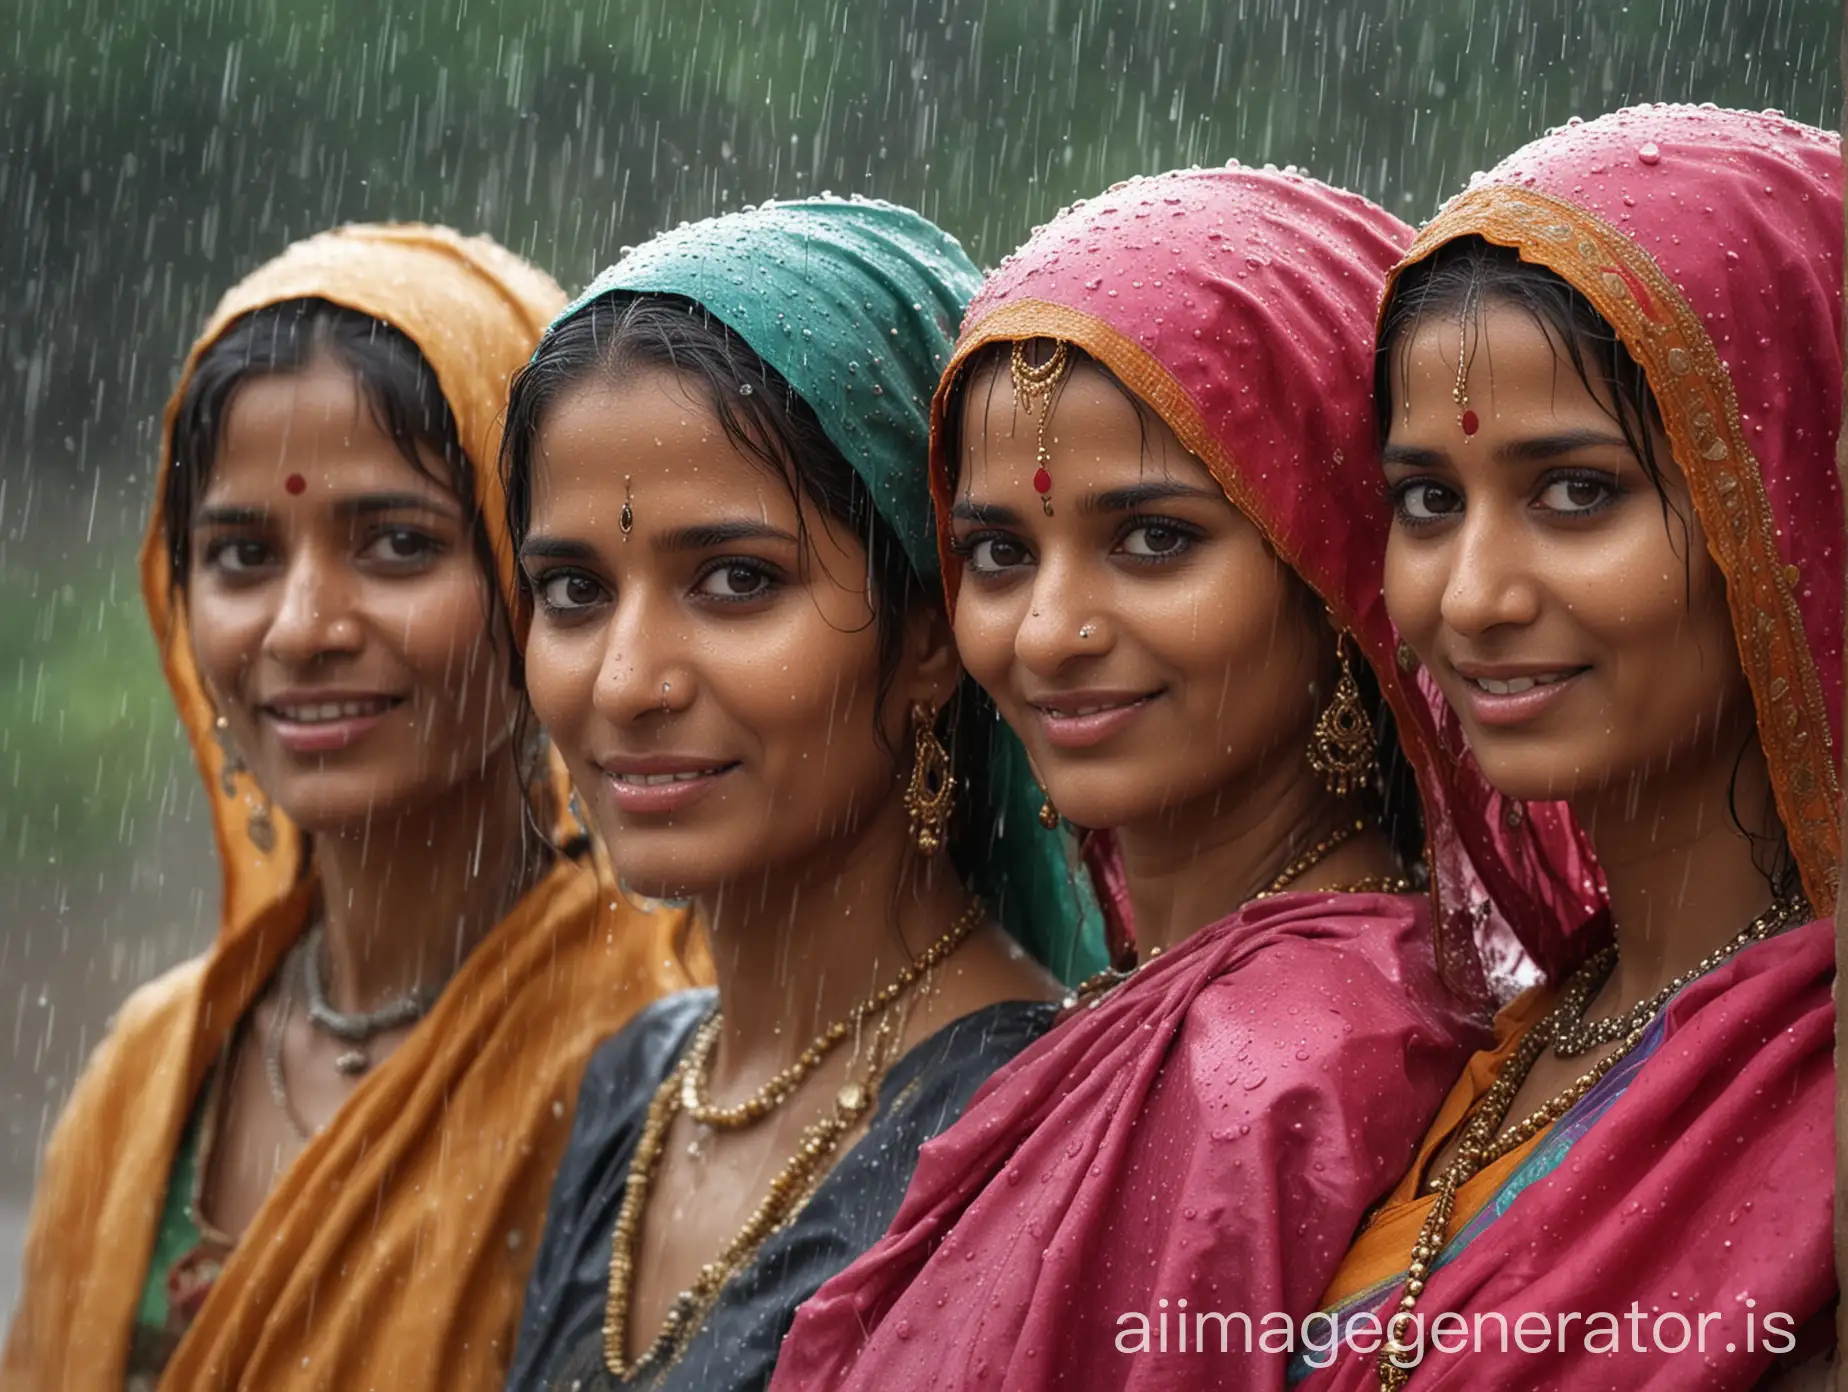 Generate a real image of group of Rajasthani ladies in rains